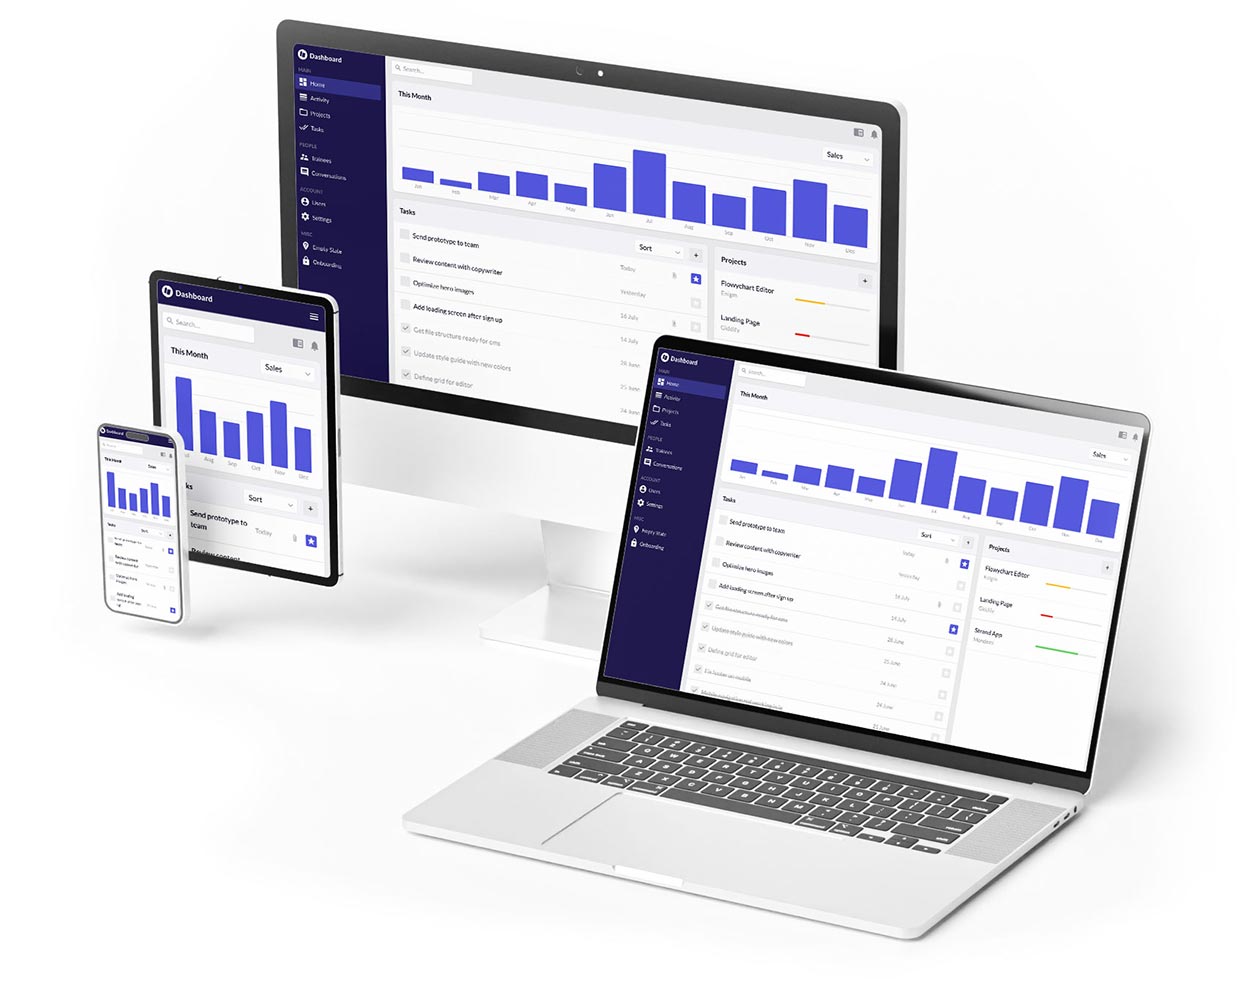 Multiple devices show how Unified would display the same integrated data across each device.